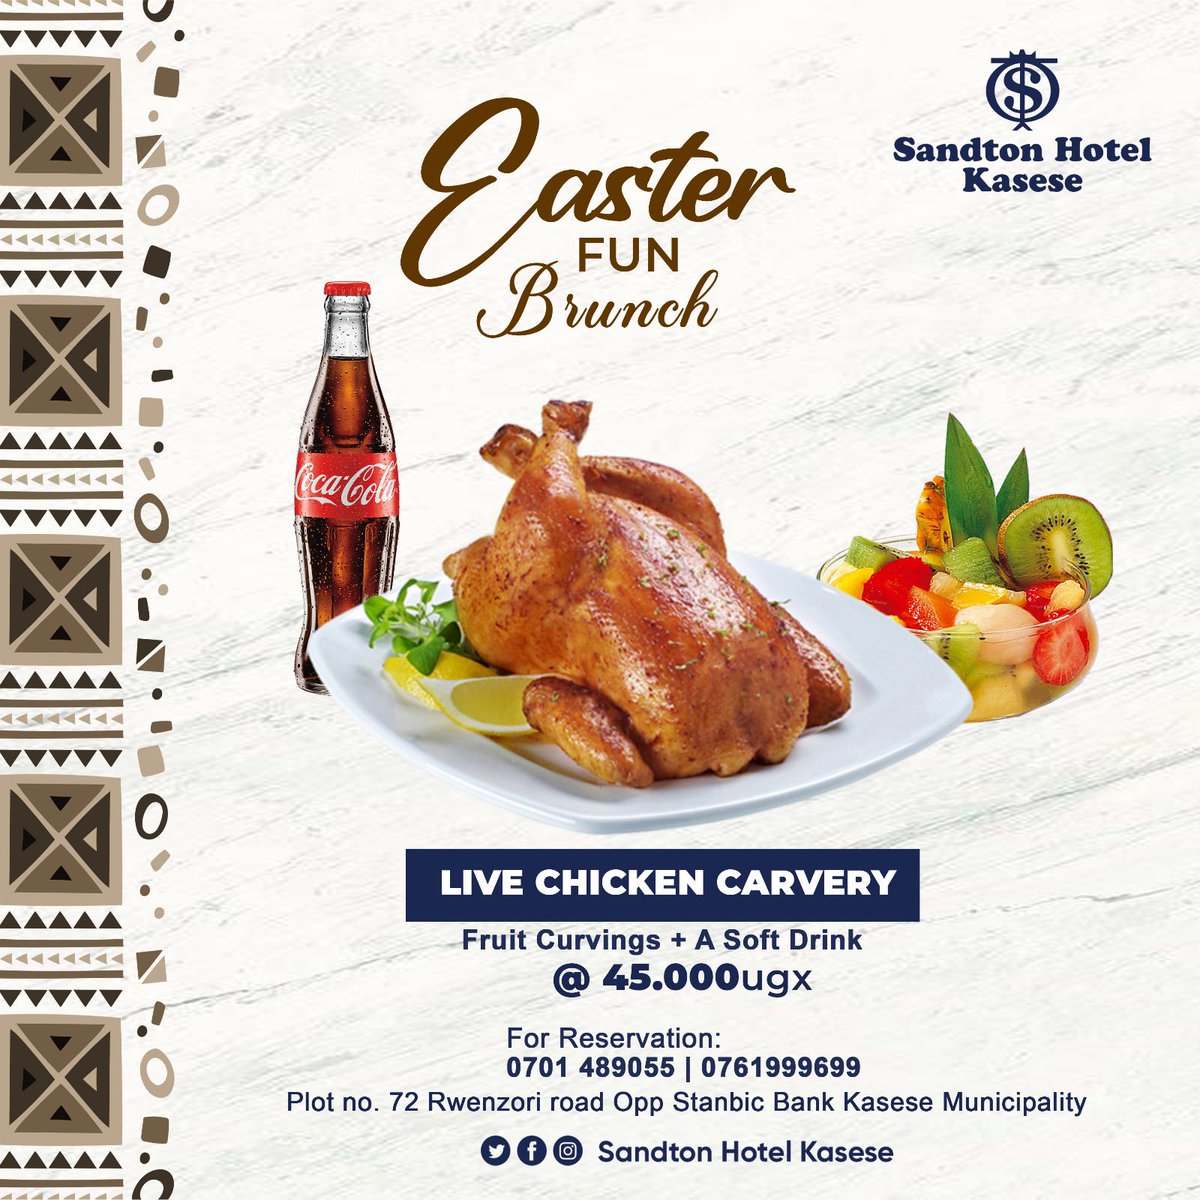 A Happy Easter to you all from us❤️
God bless the food, day and journey mercies to all even those having Easter with us at Kasese Sandton Hotel #Facts_About_EasterSunday #Easter2023 #heisrisen #Cinderella #JohnWick4